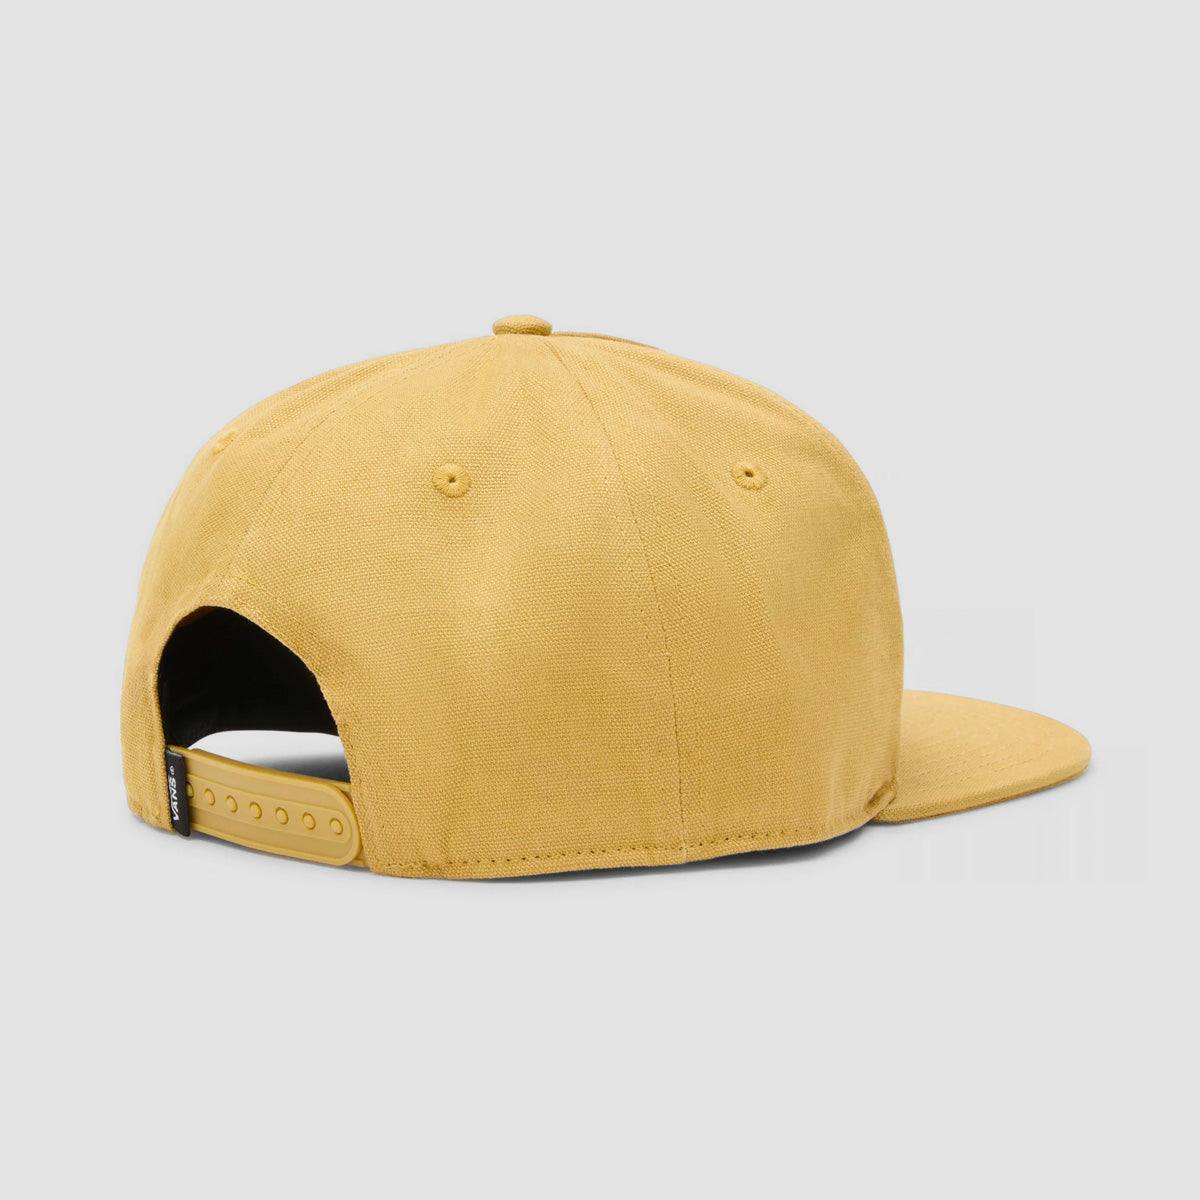 Vans Off The Wall Patch Snapback Cap Antelope